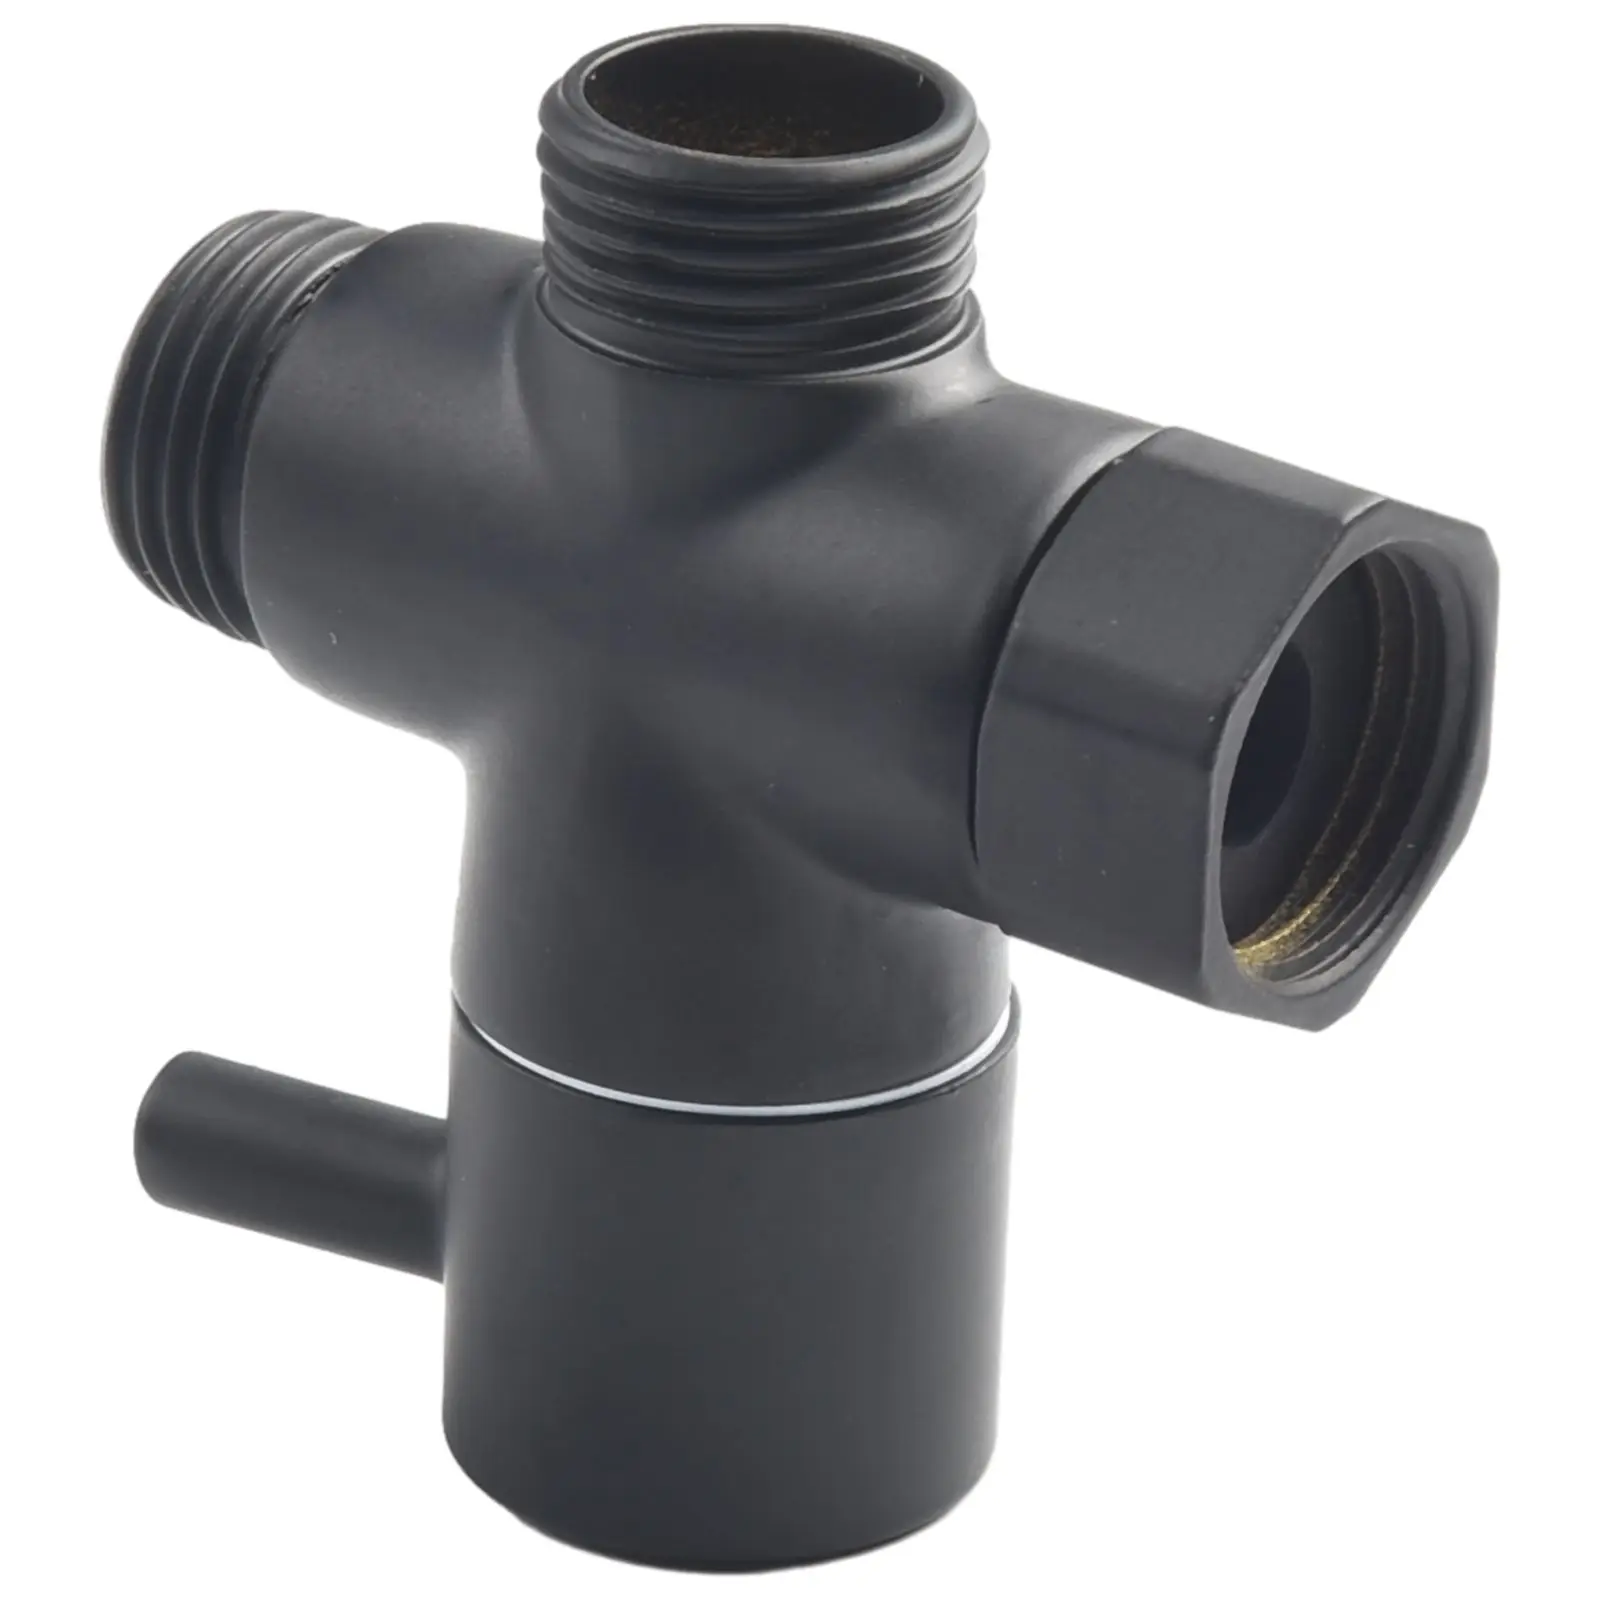 Sturdy And Durable Diverter Valve T Adapter 1/2in Female 1/2in Male Black Brass For Shower Head Solid Metal Handle